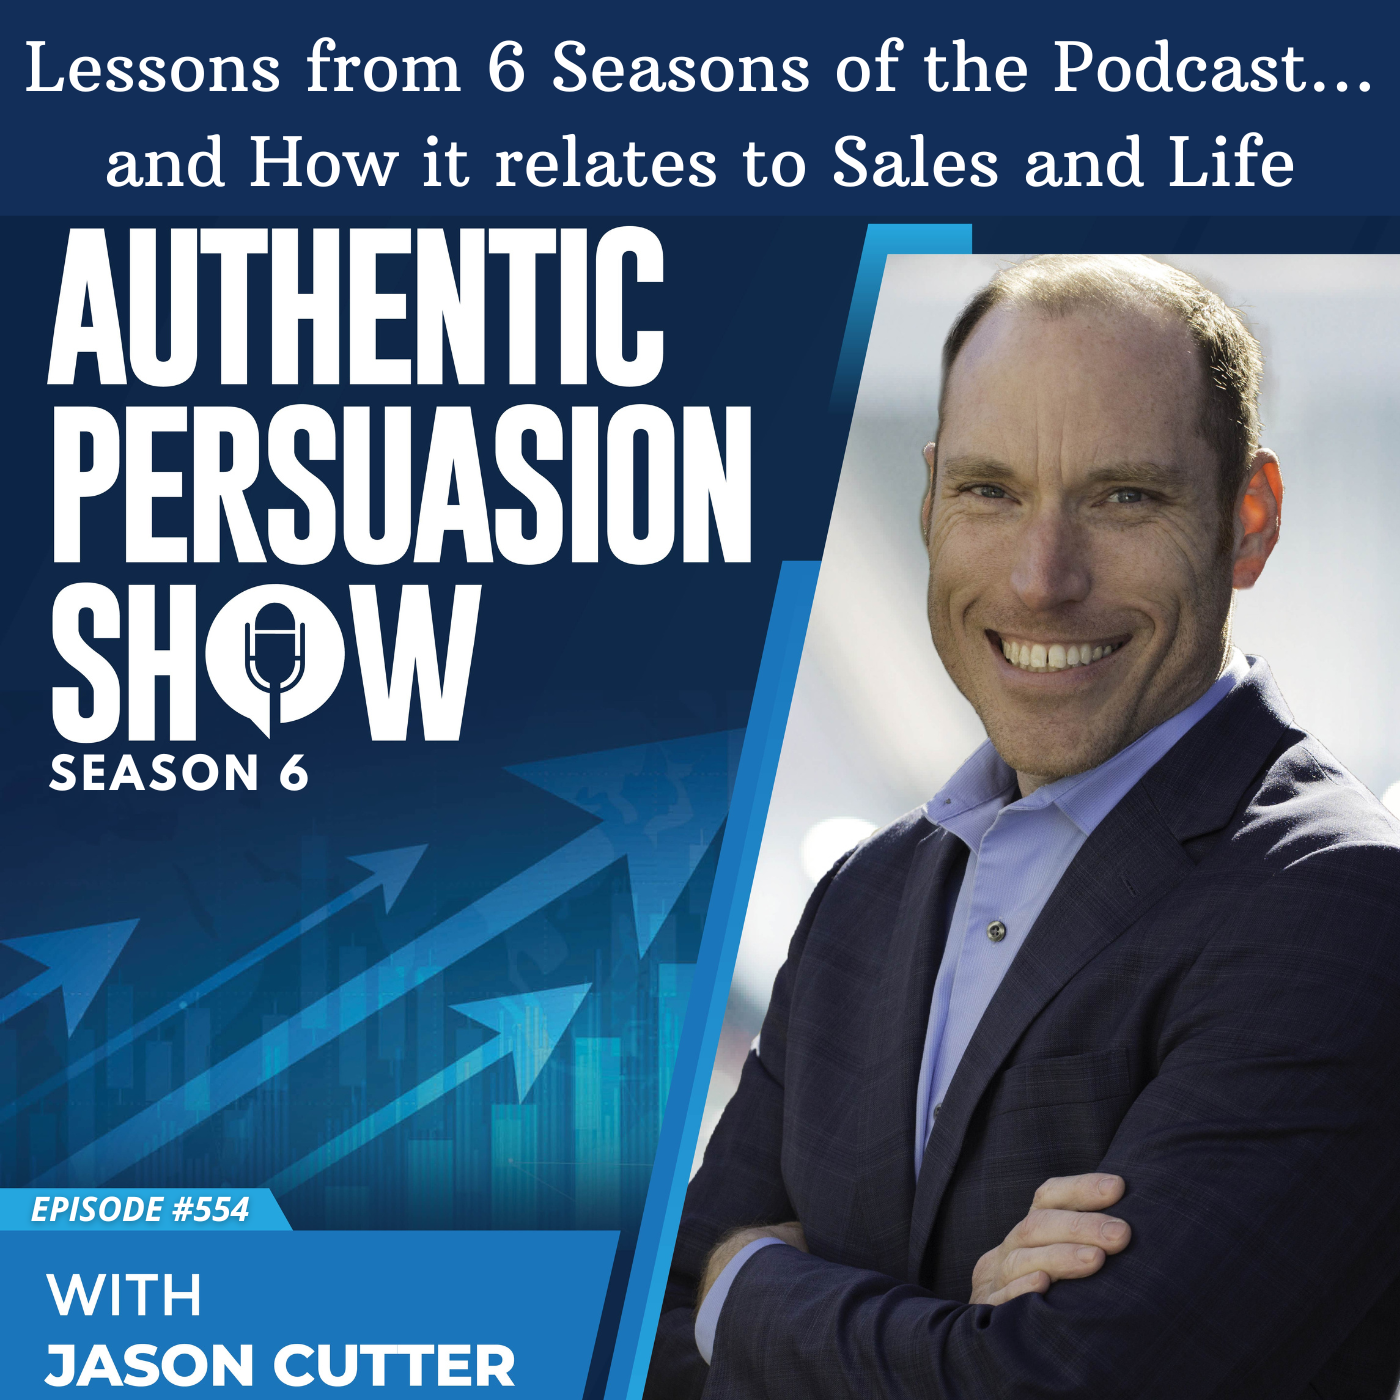 [554] Lessons from 6 Seasons of the Podcast...and How it relates to Sales and Life